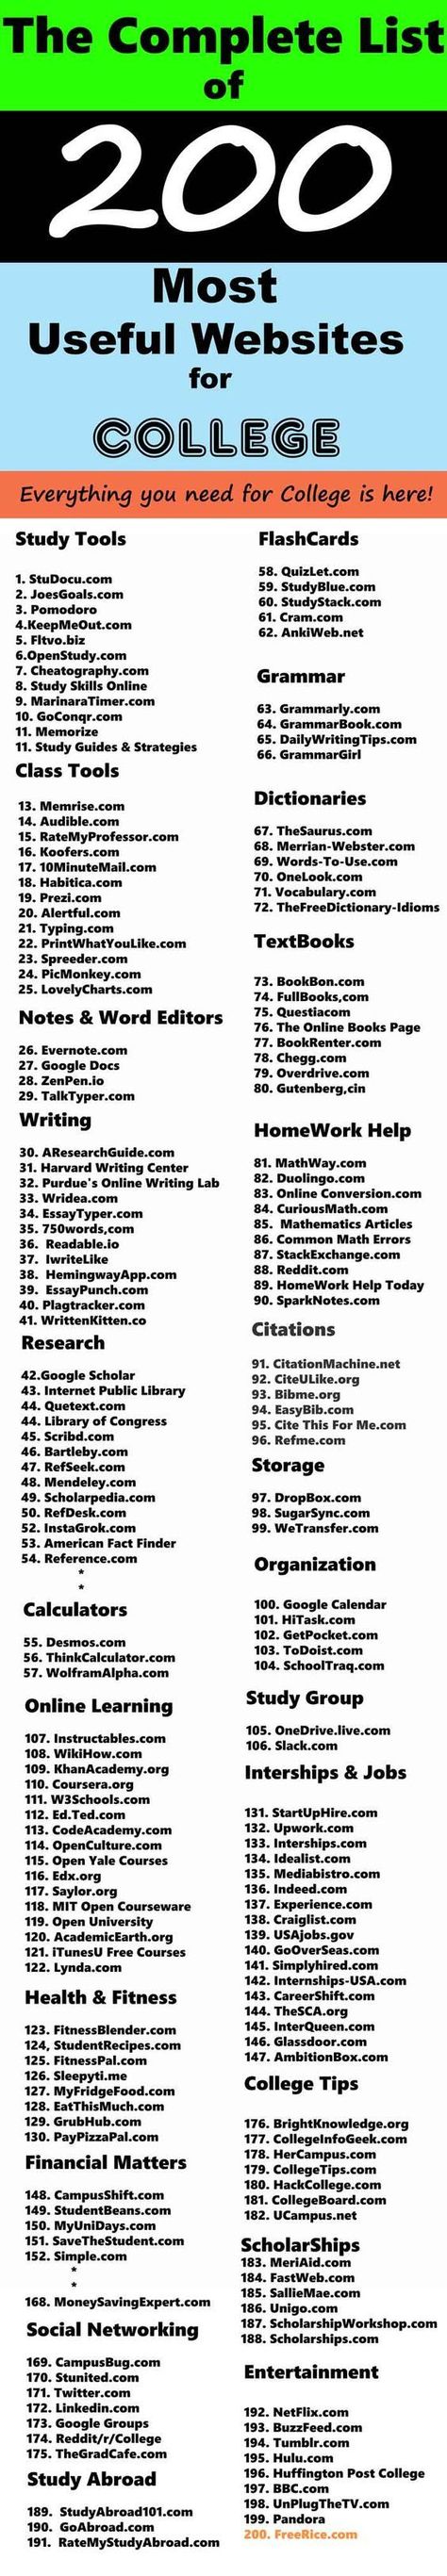 Apps, Research Websites, Websites For Students, Online Learning, Learning Websites, Educational Websites, How To Memorize Things, Online College, Study Skills